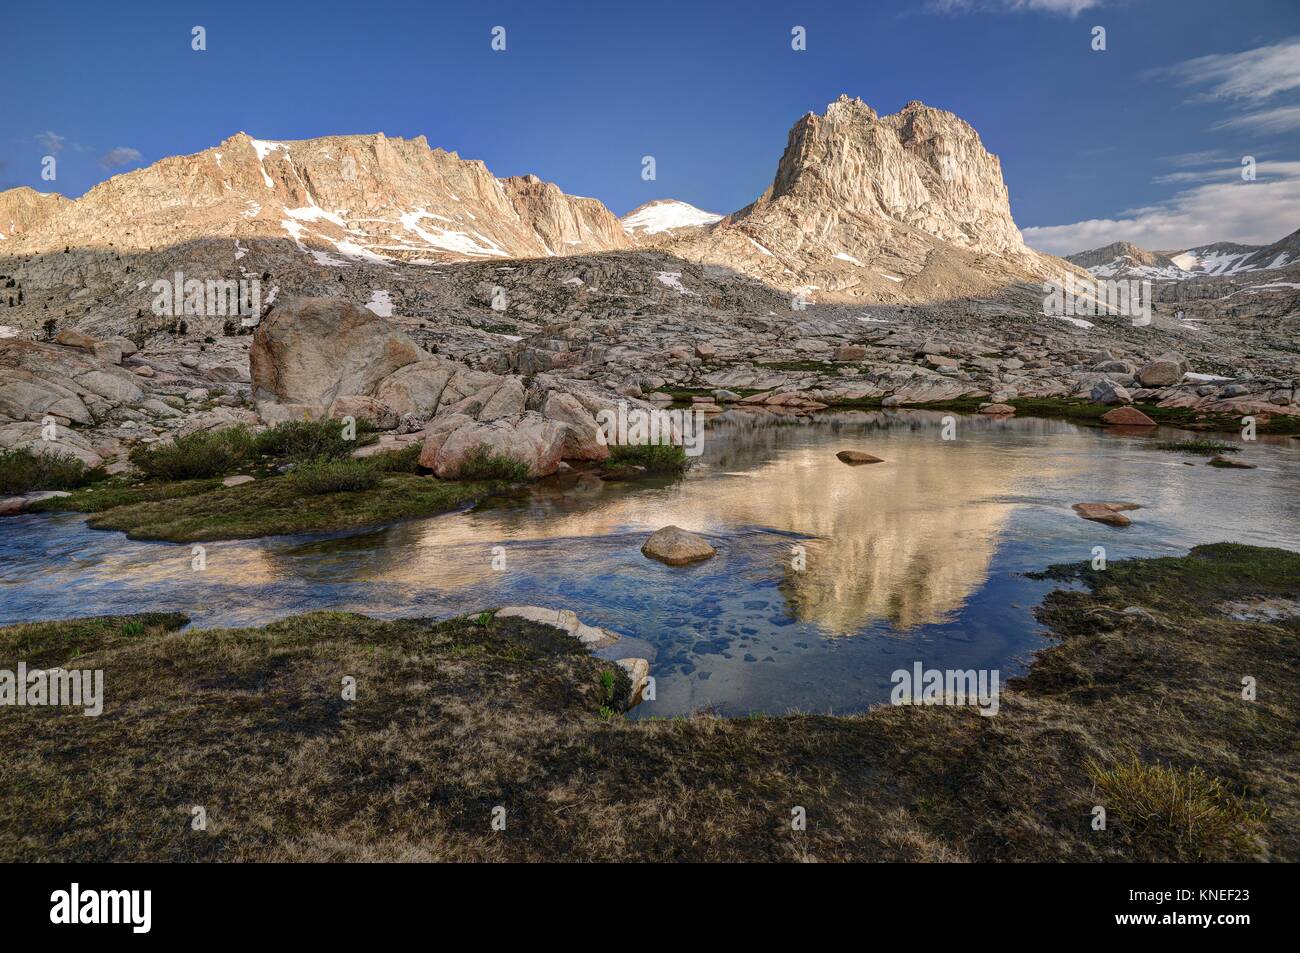 Mountain Reflections in Rock Creek, Sequoia National Forest, Californie, États-Unis Banque D'Images